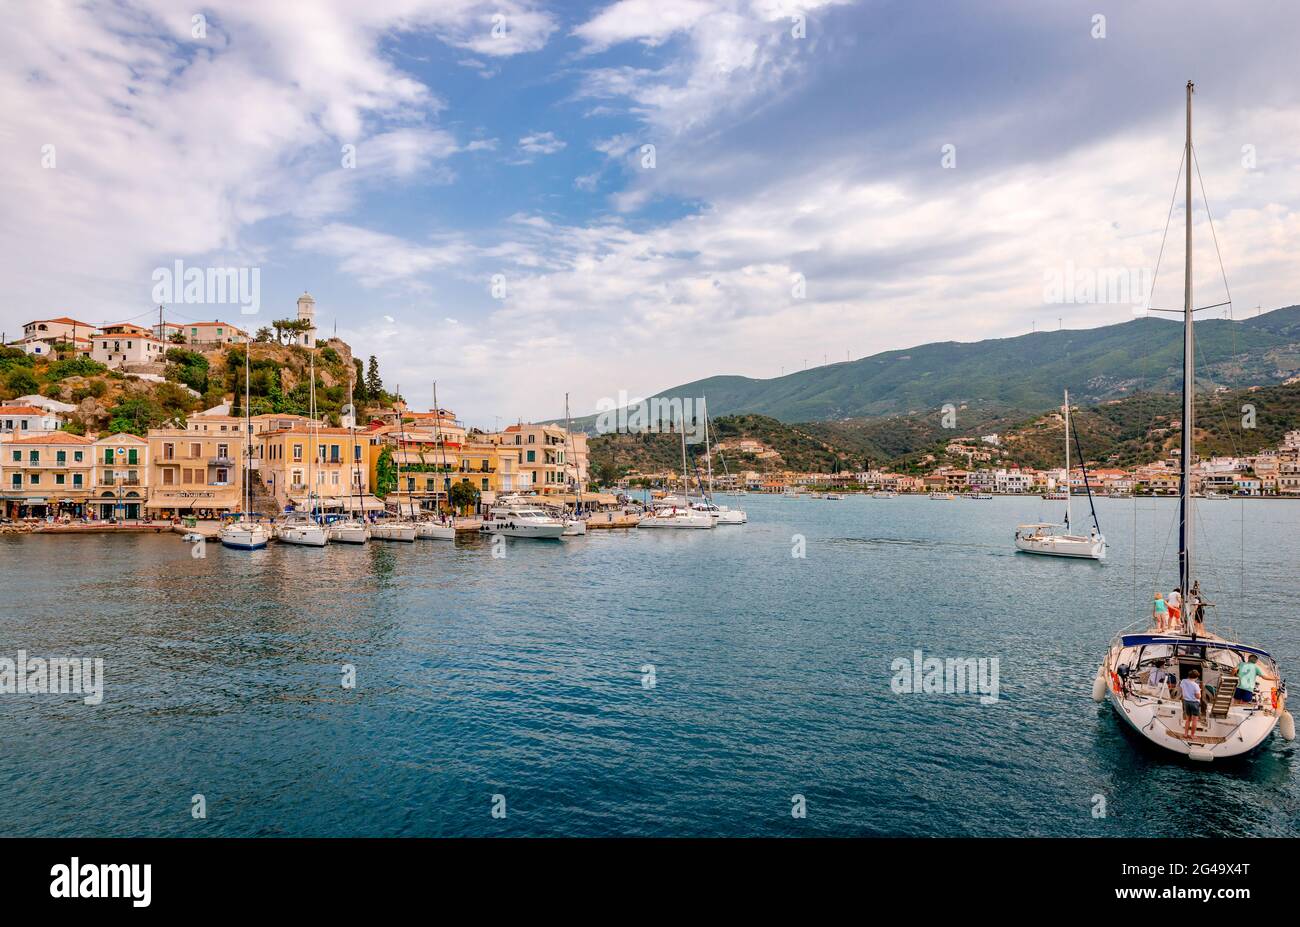 Poros, Greece - April 30 2018: View of the port and the town, with many sailing boats. The town of Galatas, at the Peloponnesean coast, is in the back Stock Photo